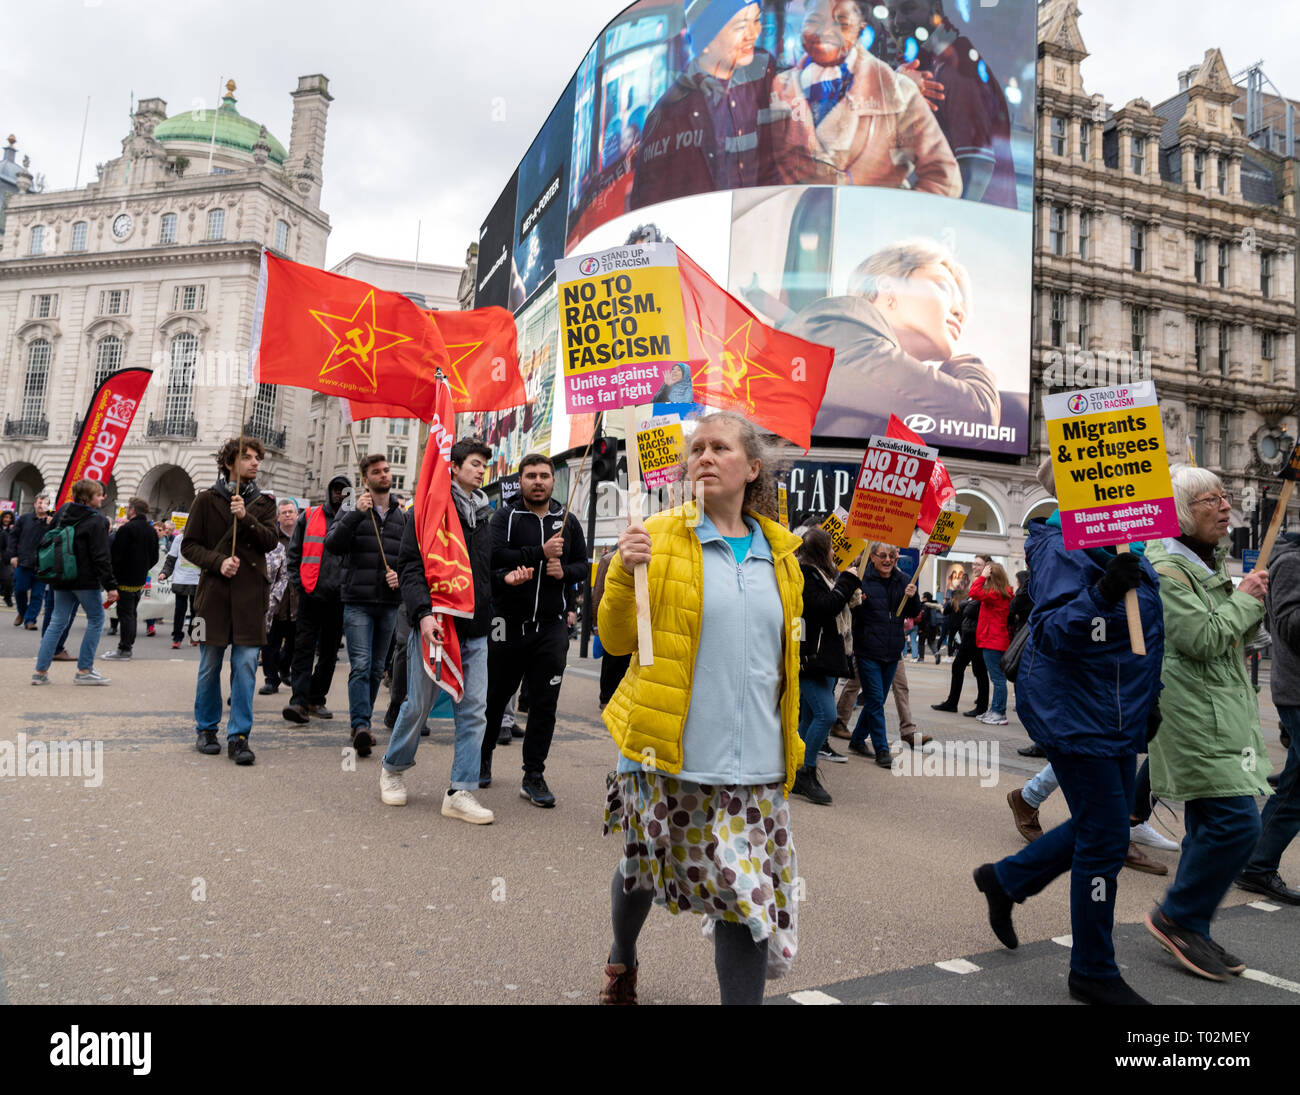 London, UK. 16th Feb, 2019. People come together to protest against far-right groups in UK and Europe. Credit: AndKa/Alamy Live News Stock Photo